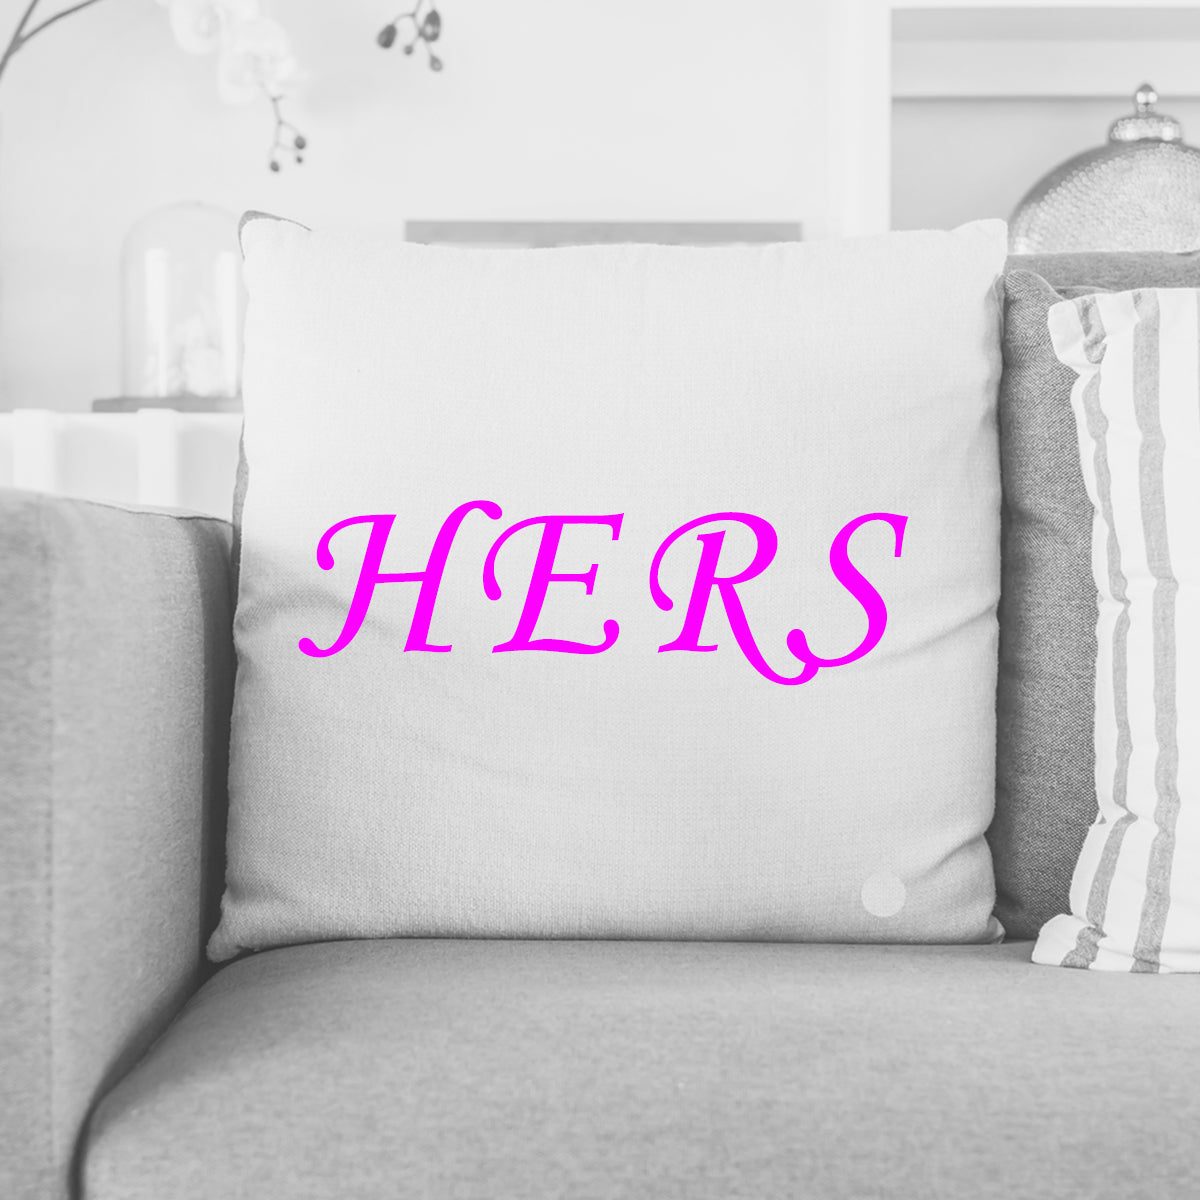 His/Hers Pillow